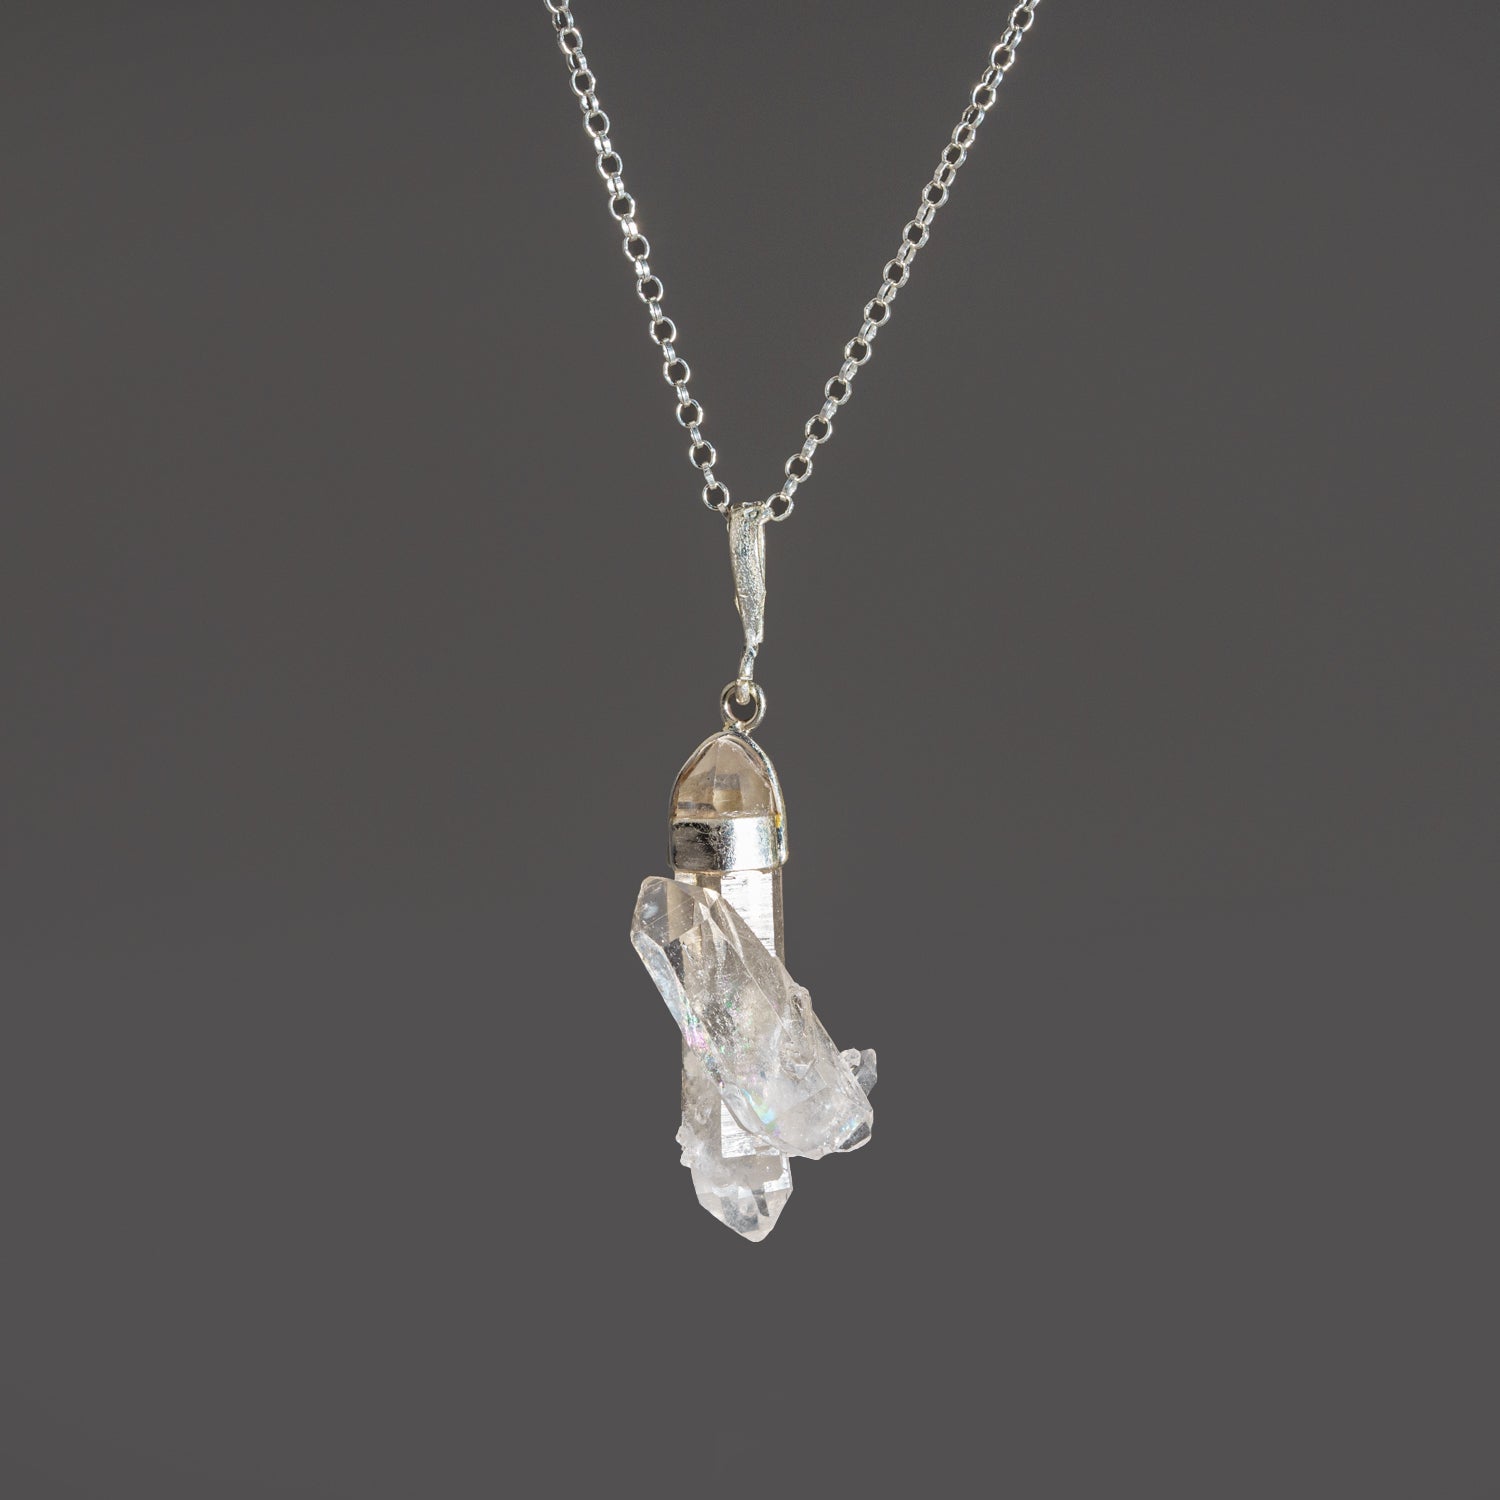 Genuine Double Terminated Clear Quartz Crystal Pendant with 18" Sterling Silver Chain